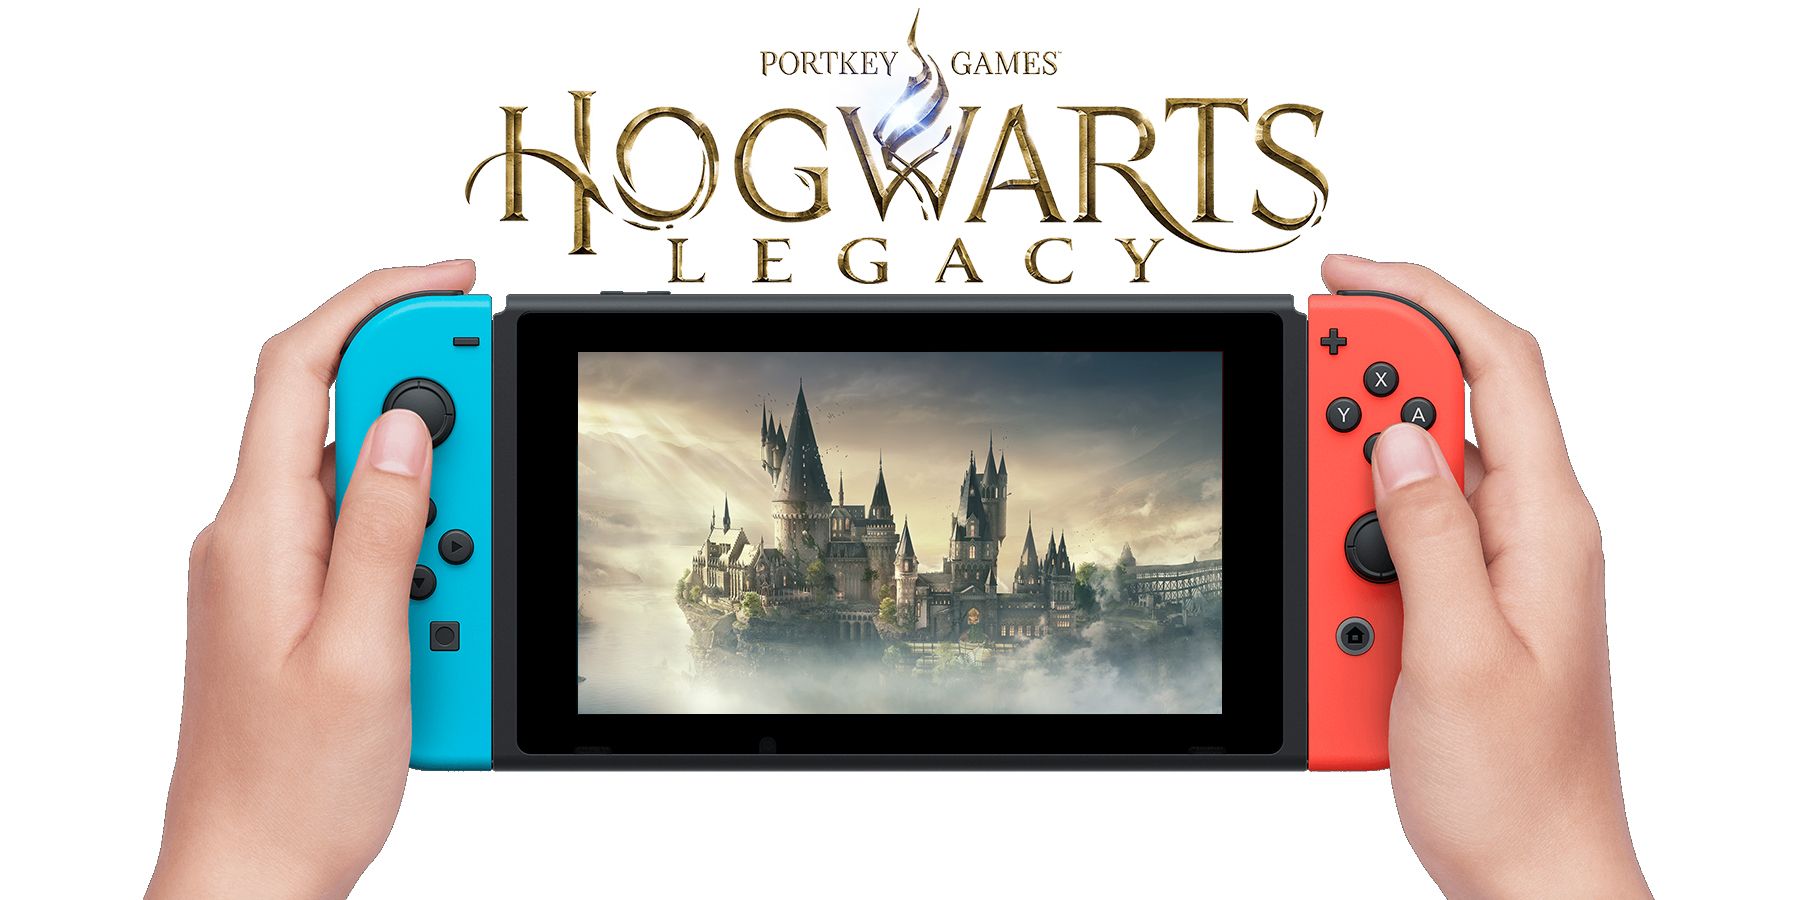 Hogwarts Legacy' Is Now Available on Nintendo Switch: Where to Buy